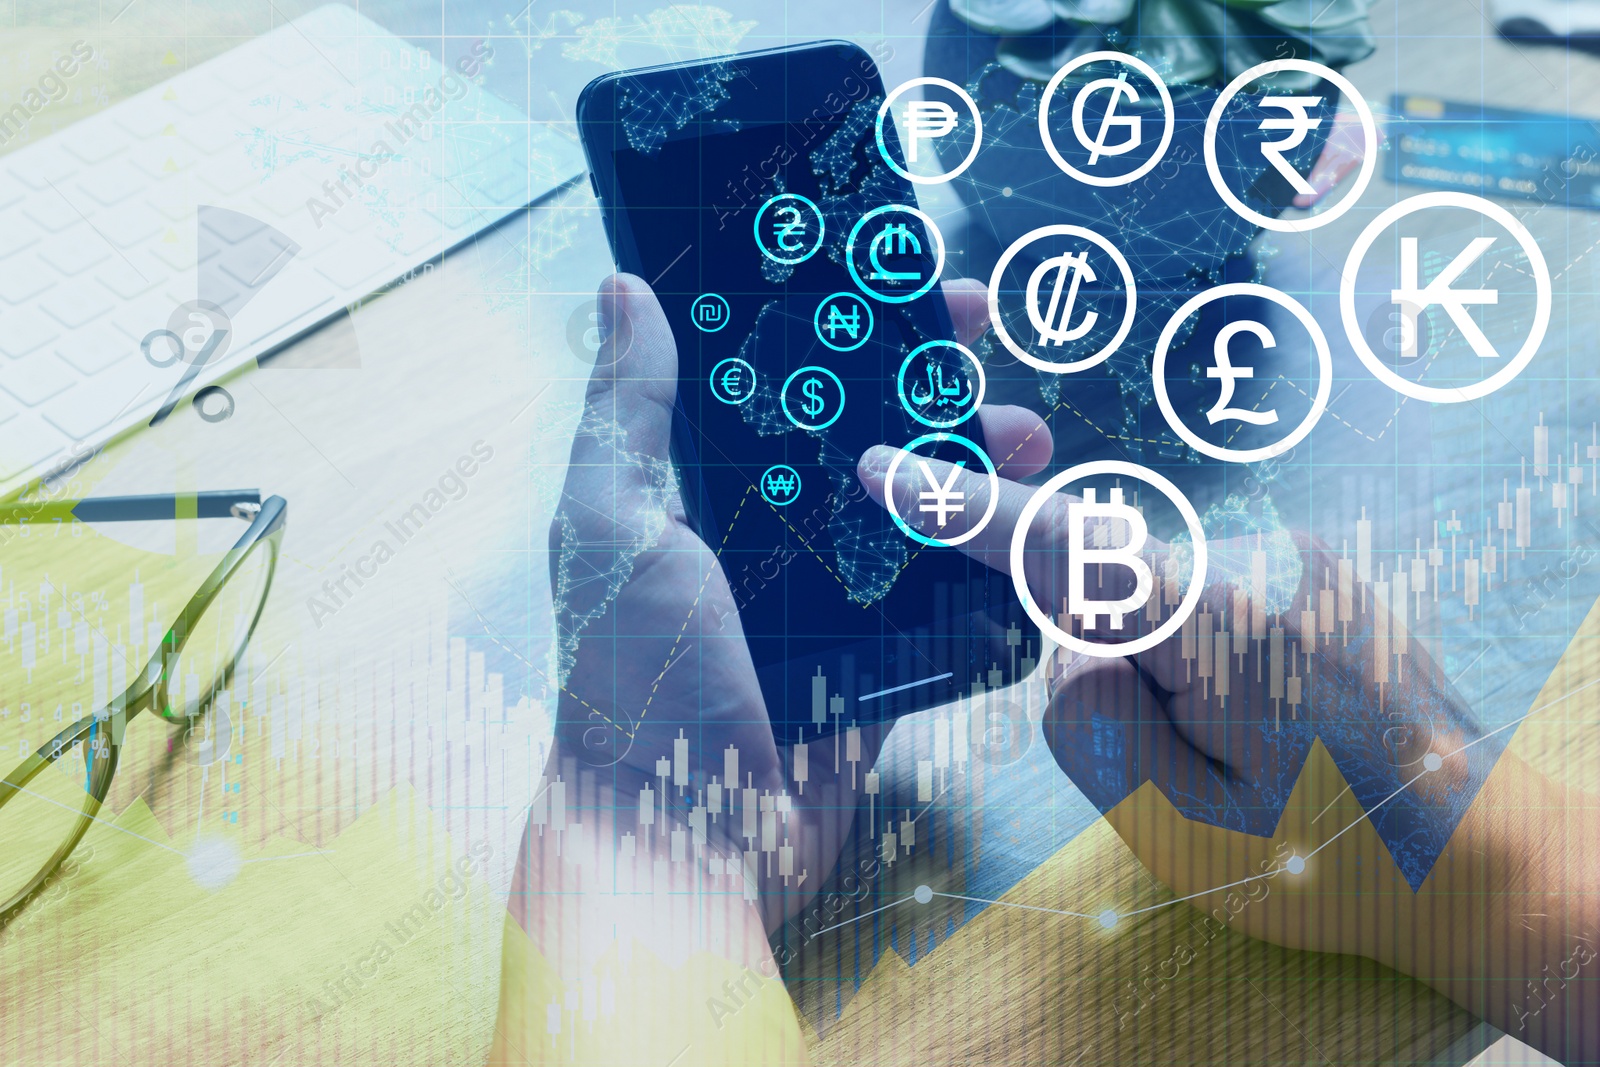 Image of Money exchange. Double exposure with chart, different currency symbols and photo of man using smartphone